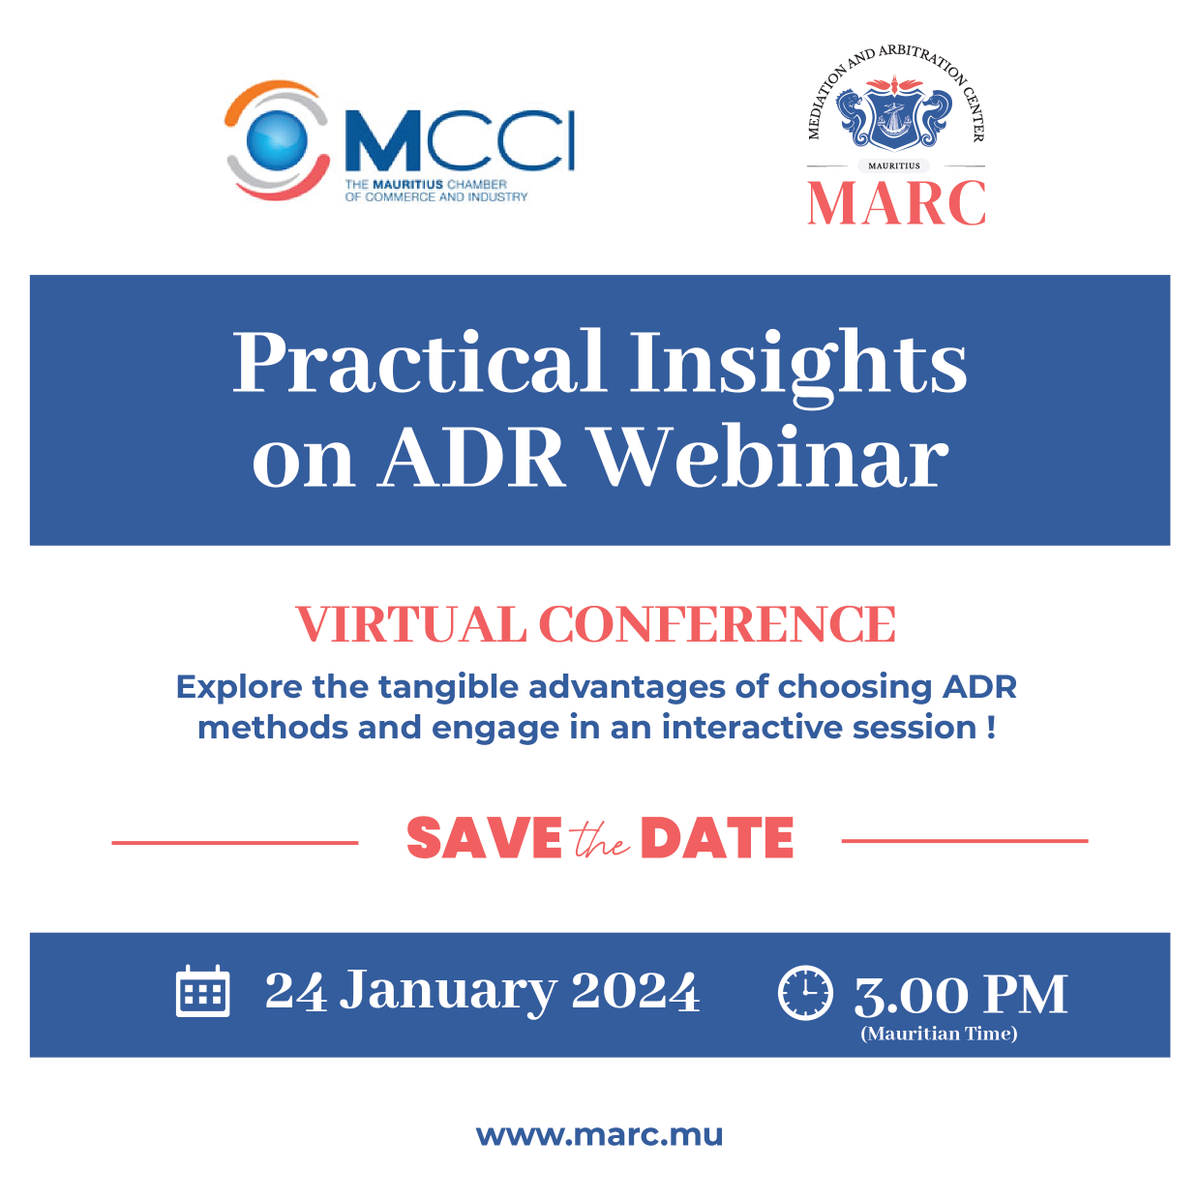 #SavetheDate! Join our member, #MCCI in collaboration w/ #MARC for a 🔥webinar on #AlternativeDisputeResolution. Engage in discussions on efficiency, flexibility, confidentiality, expertise & more! 🗓️Jan 24, 2024, 13:00 CAT | 14:00 EAT 📩RSVP info@comesabusinesscouncil.org #ADR